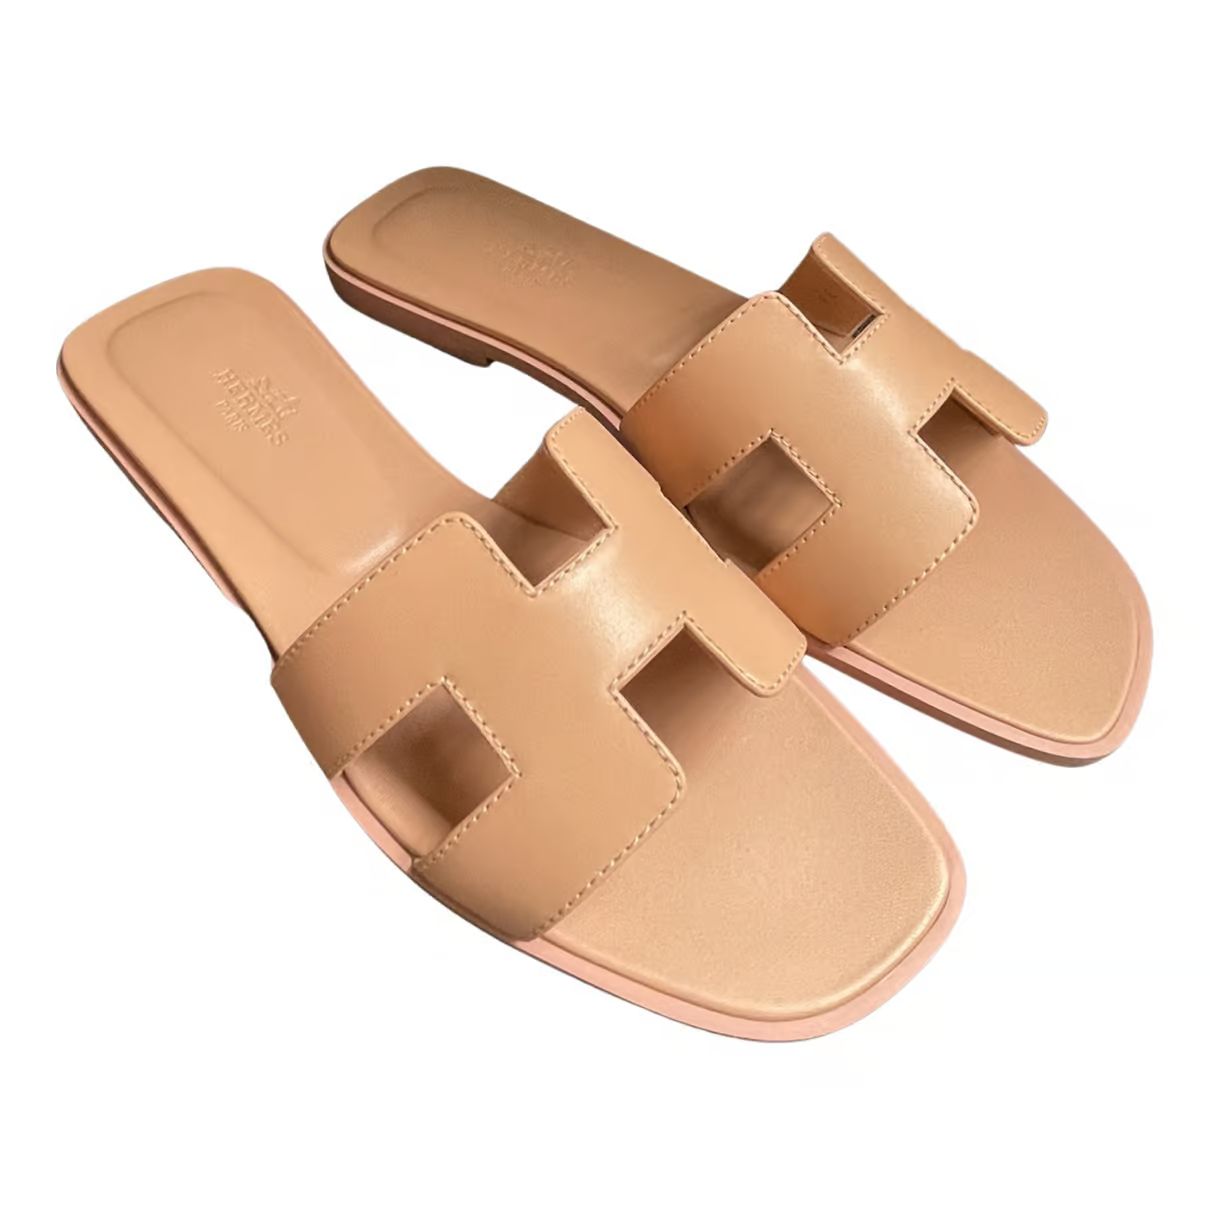 Oran leather sandal Hermès Pink size 38 EU in Leather - 24334419 | Vestiaire Collective (Global)